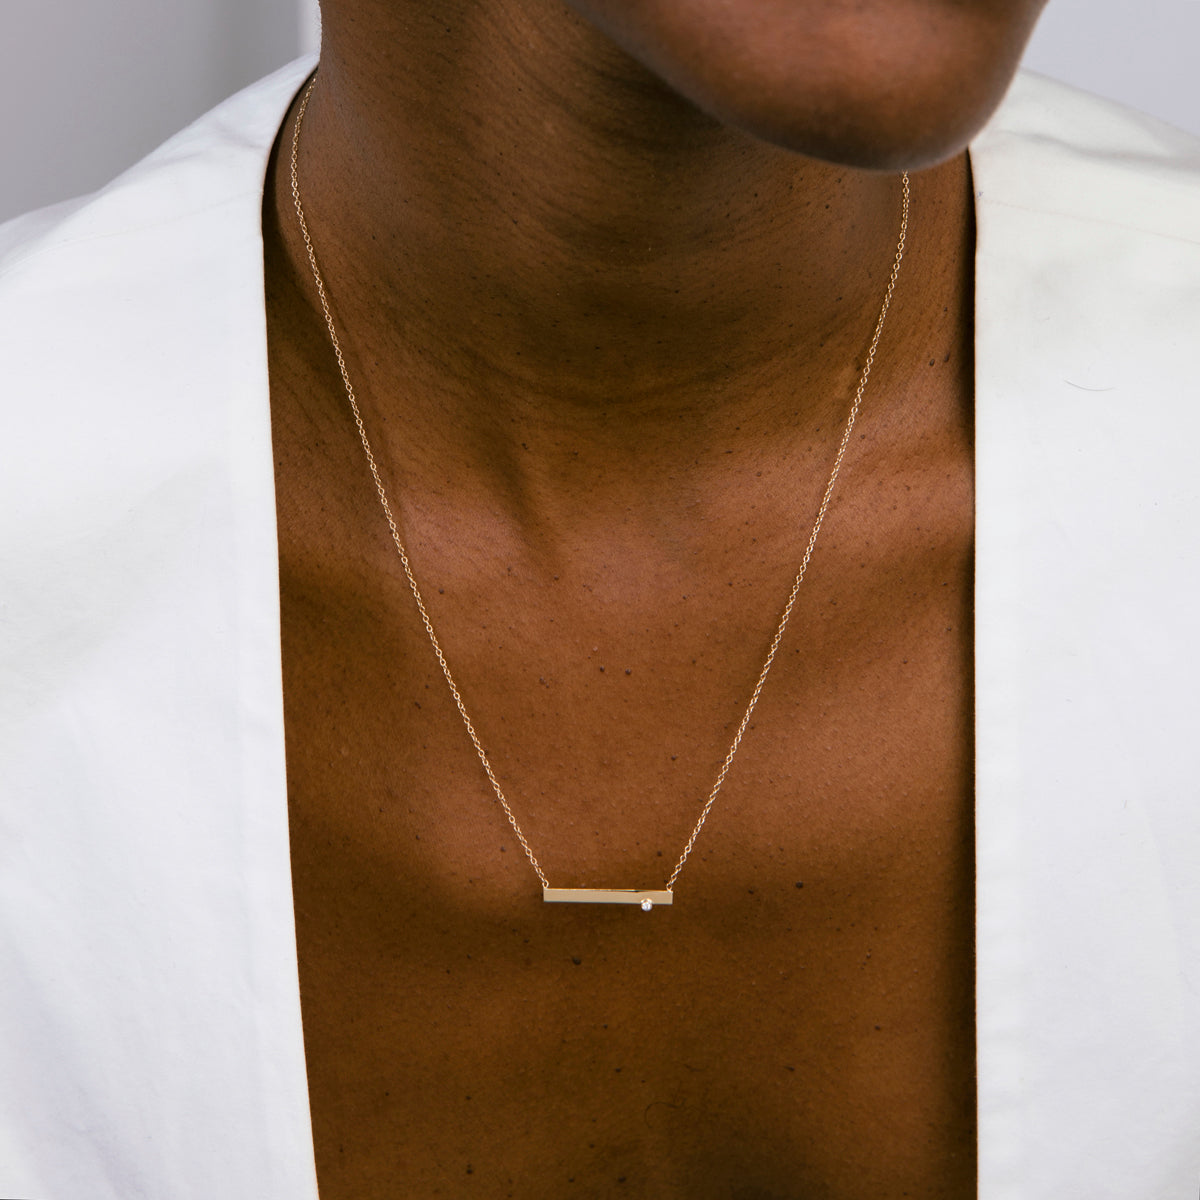 Lane Thin Necklace in 14k Gold set with White Diamond By SHW Fine Jewelry NYC